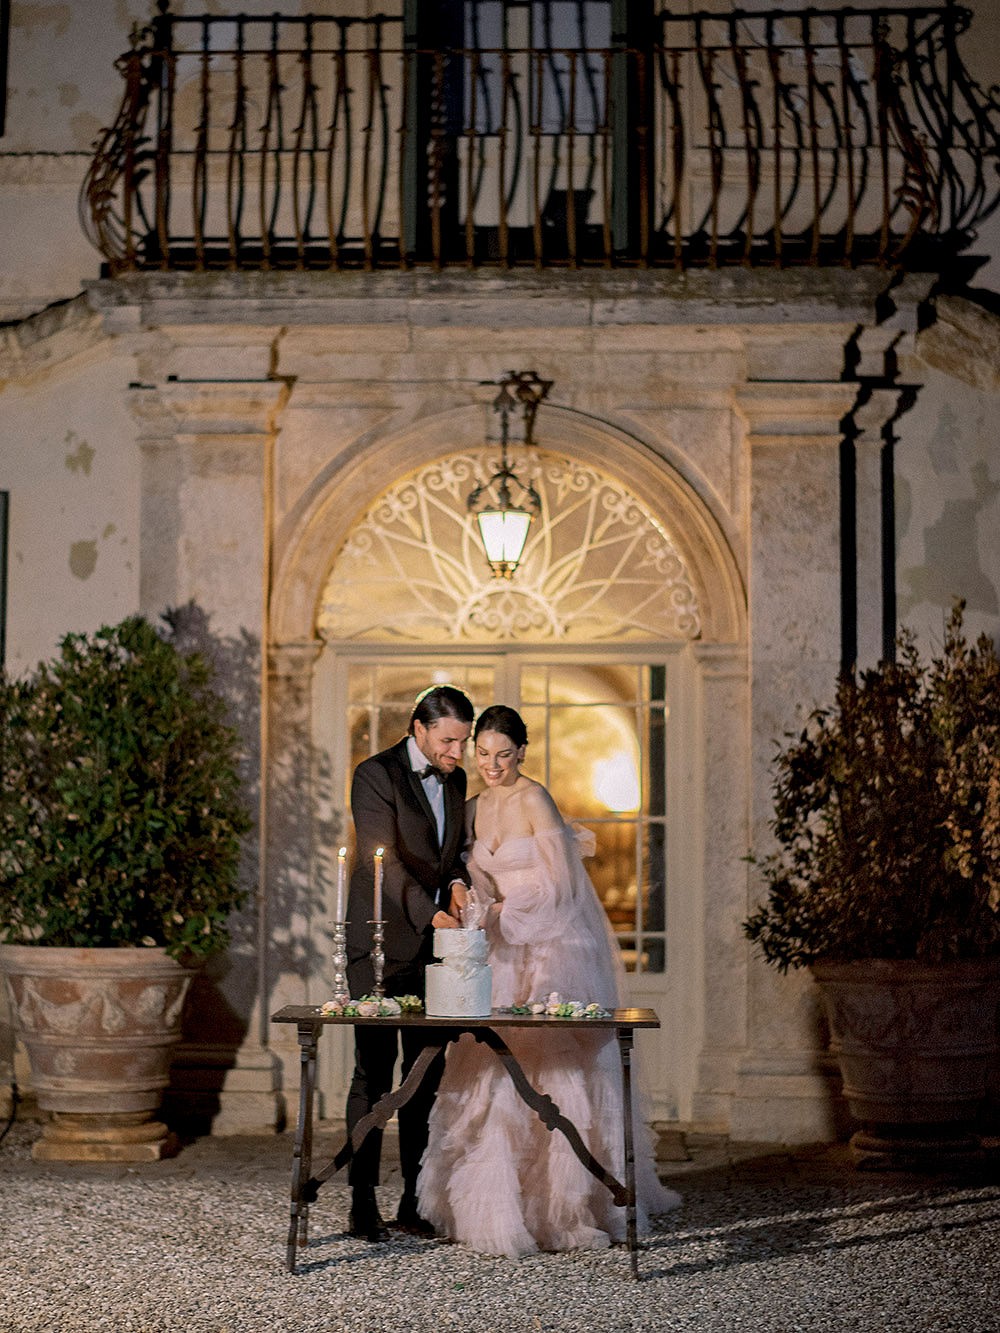 Dreamy pale and interesting editorial in ancient Tuscan villa